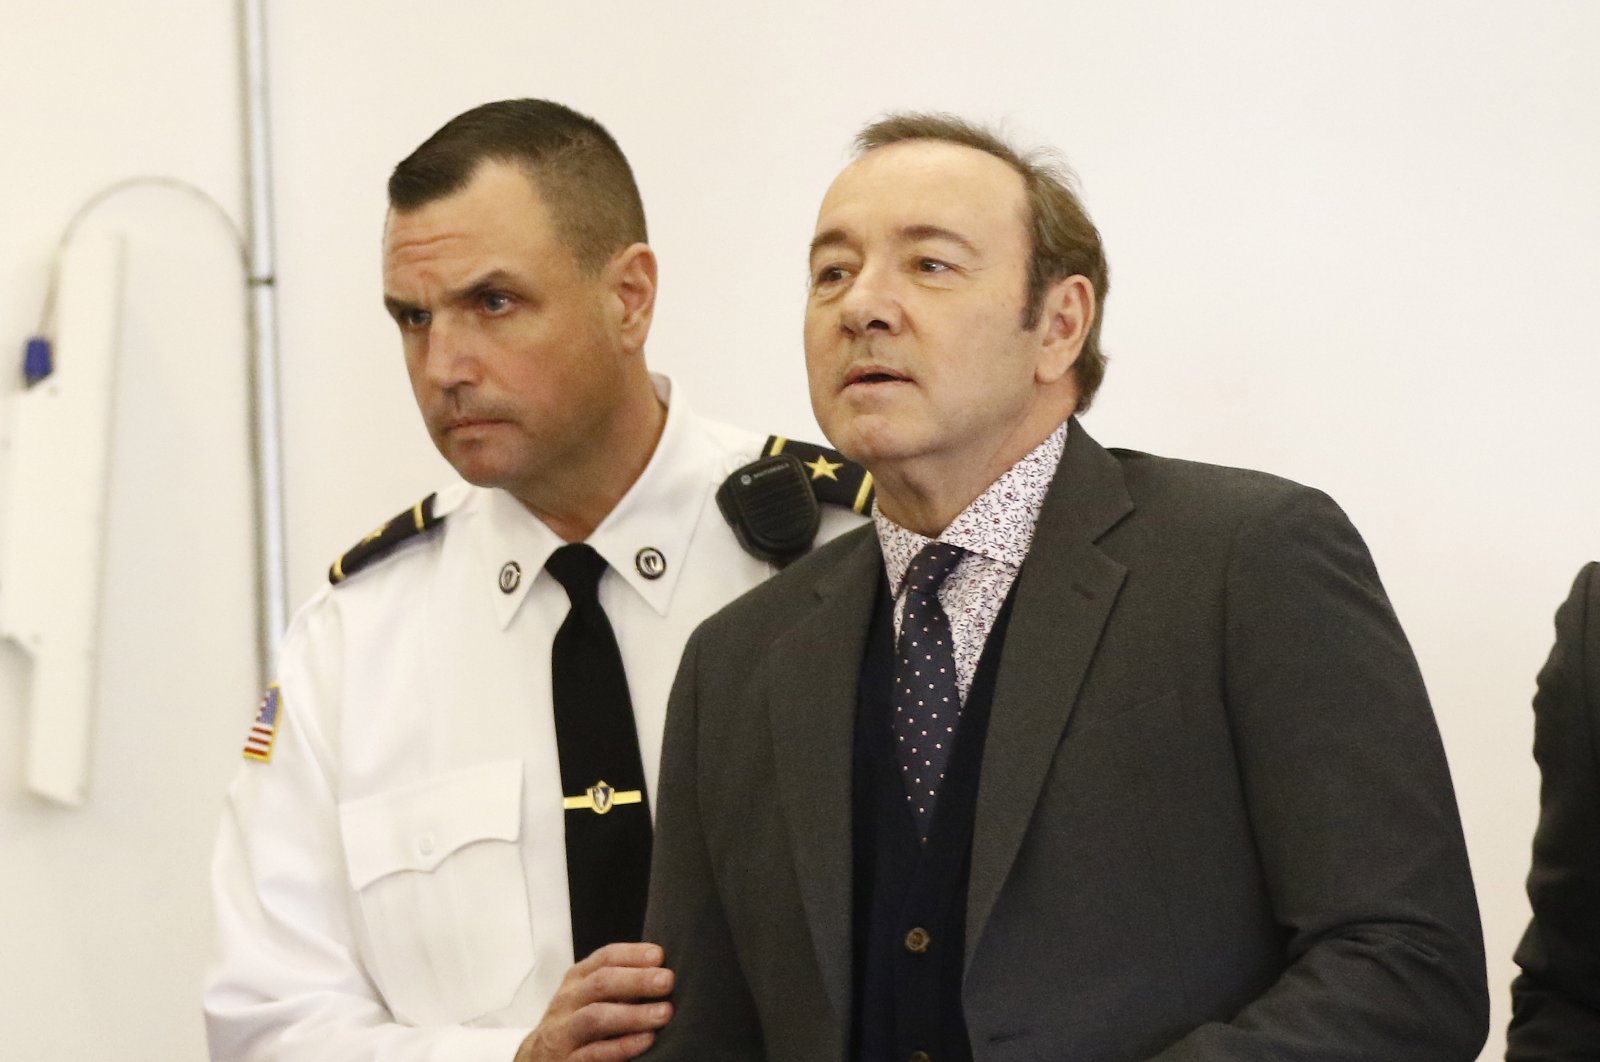 Actor Kevin Spacey (R) is escorted by a court officer as he appears at the Nantucket District Court, Nantucket, Massachusetts, U.S., Jan. 7, 2019. (EPA)